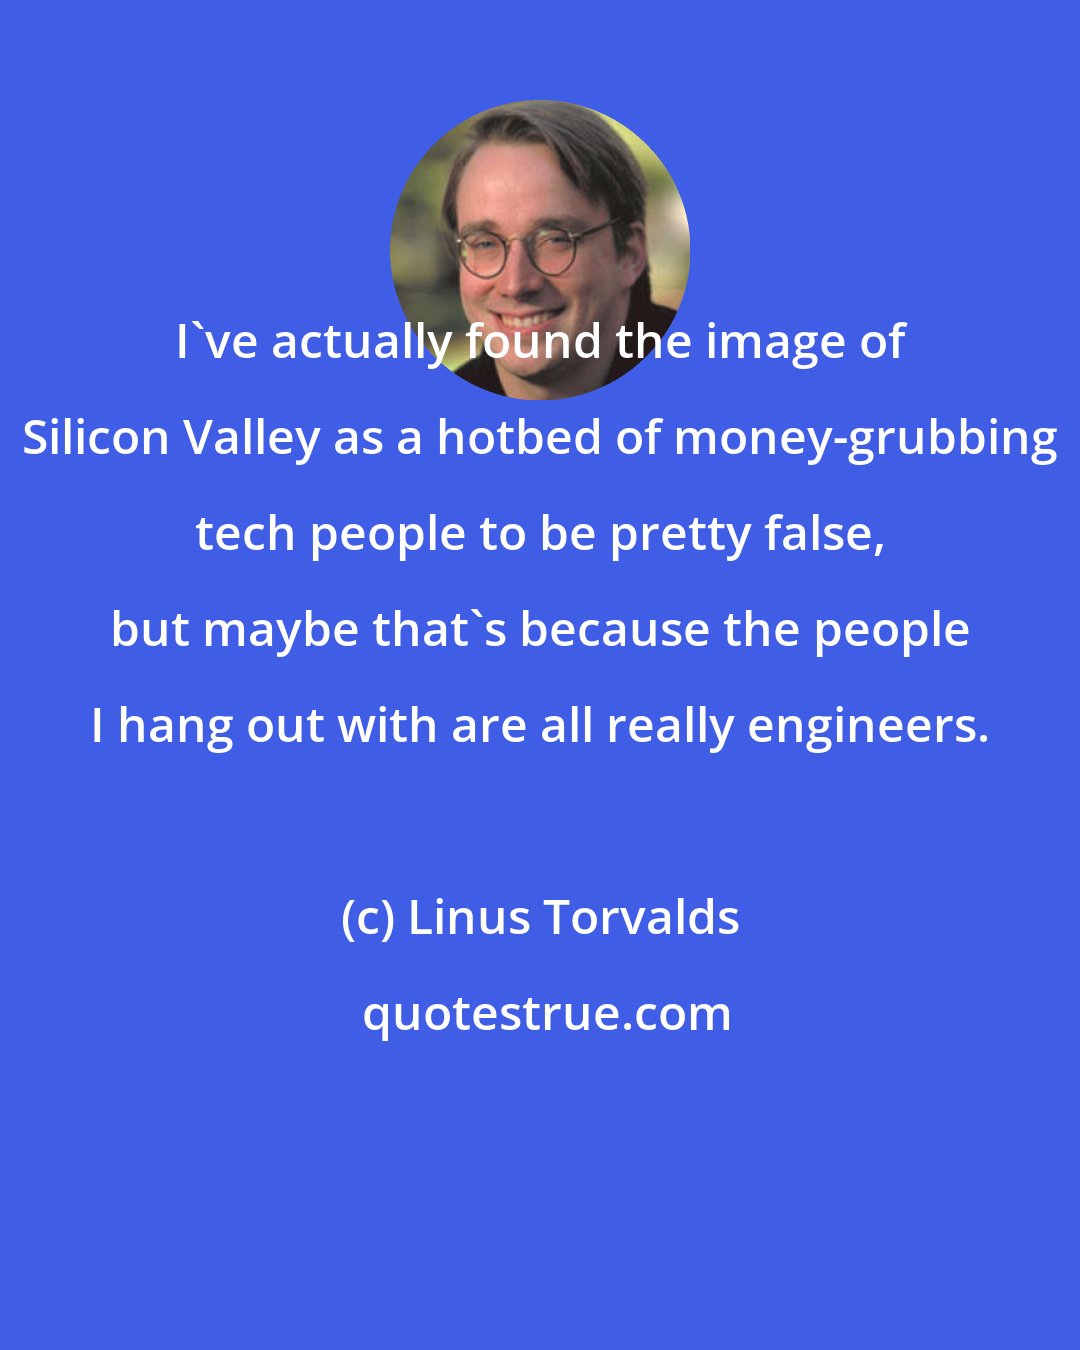 Linus Torvalds: I've actually found the image of Silicon Valley as a hotbed of money-grubbing tech people to be pretty false, but maybe that's because the people I hang out with are all really engineers.